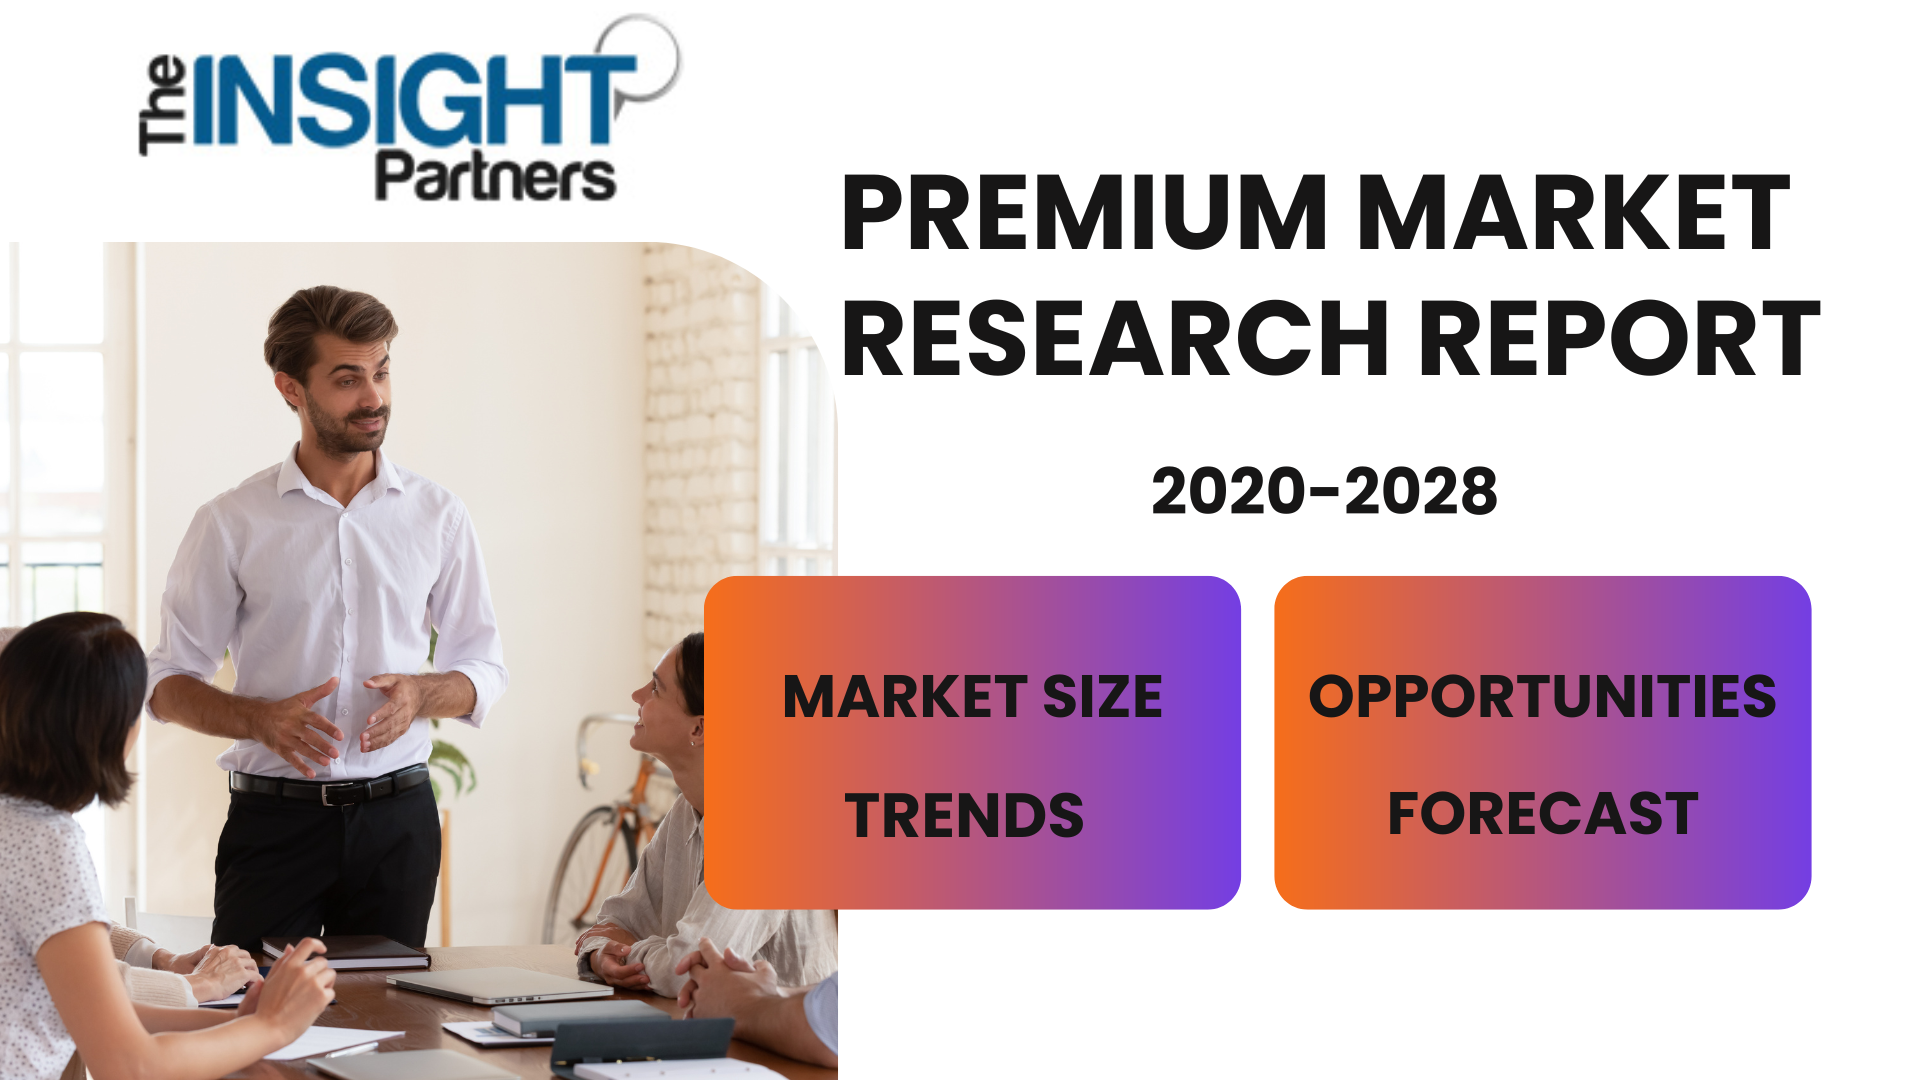 Diabetic Food Market Forecast: Business Growth, Development Factors, Applications, and Future Prospects